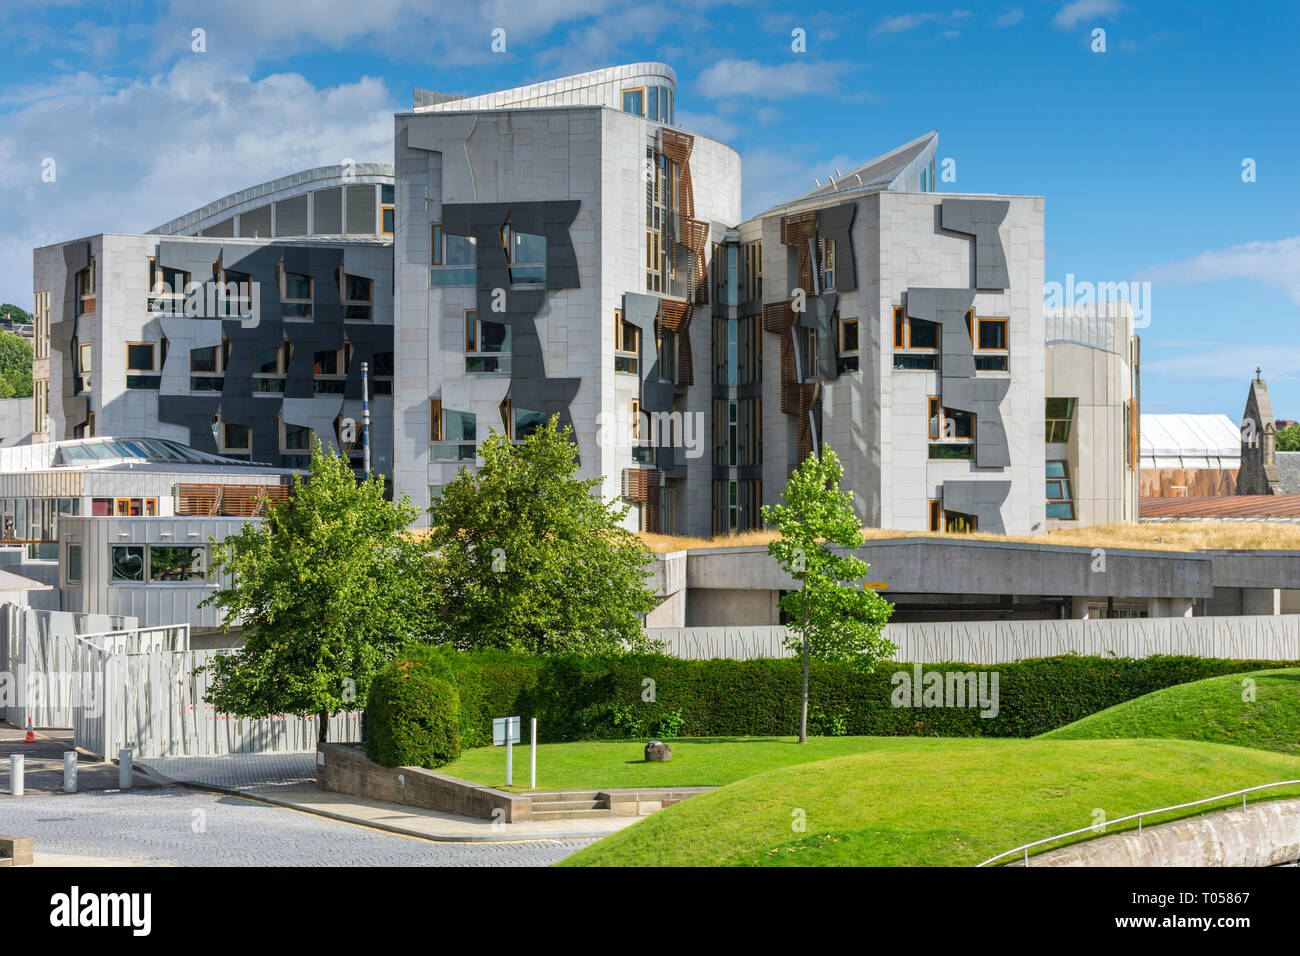 The Scottish Parliament Building (by Enric Miralles 2004), from the Our Dynamic Earth science centre, Holyrood, Edinburgh, Scotland, UK Stock Photo